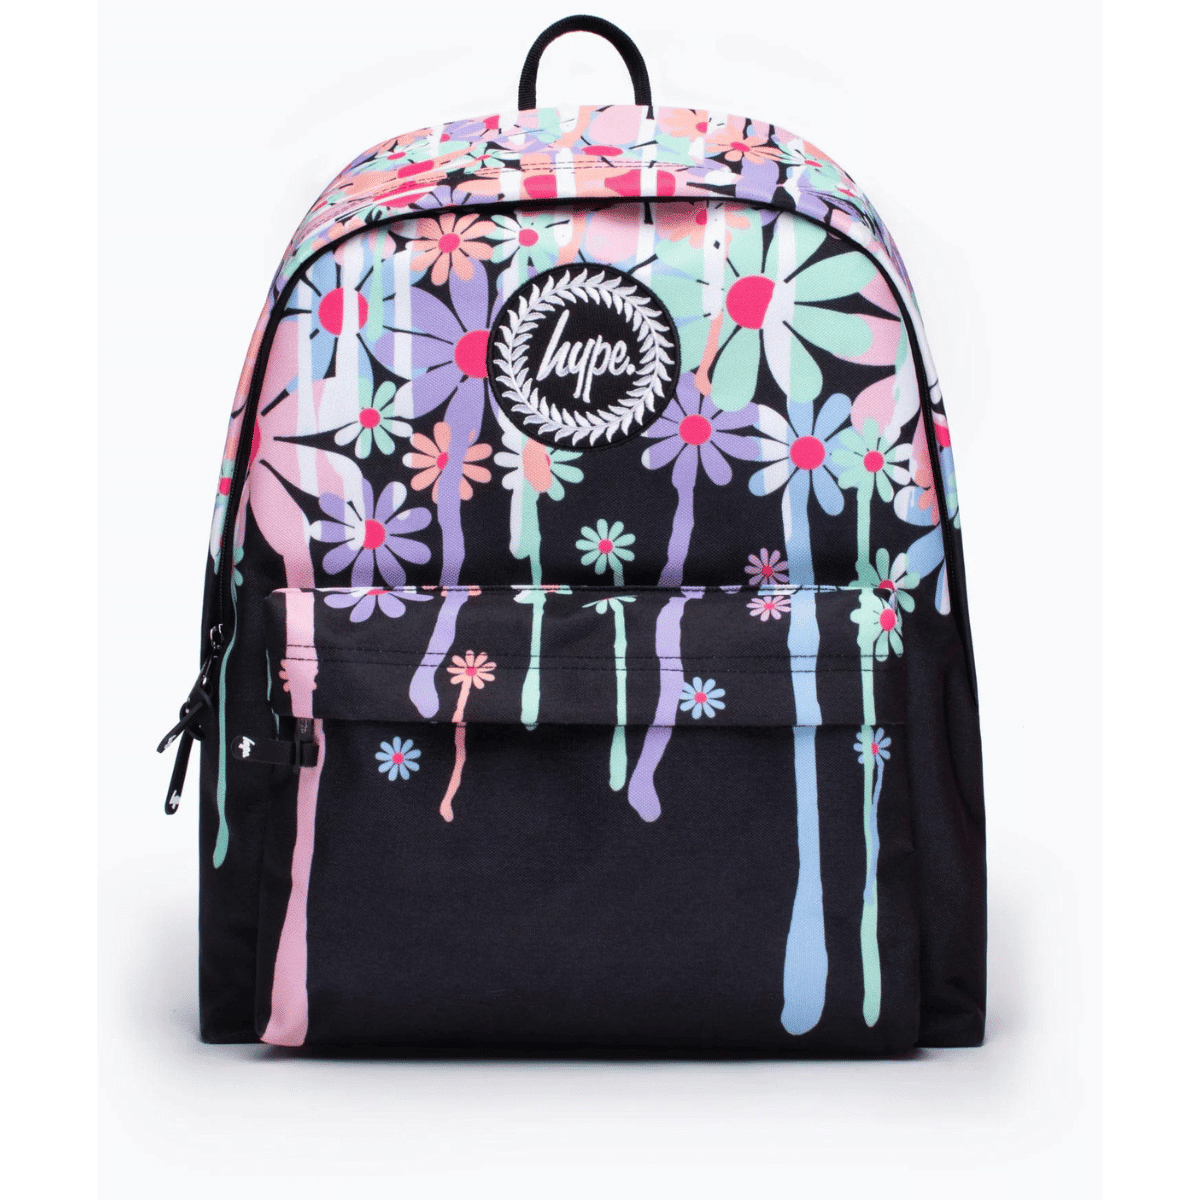 Hype rucksack with floral daisy design